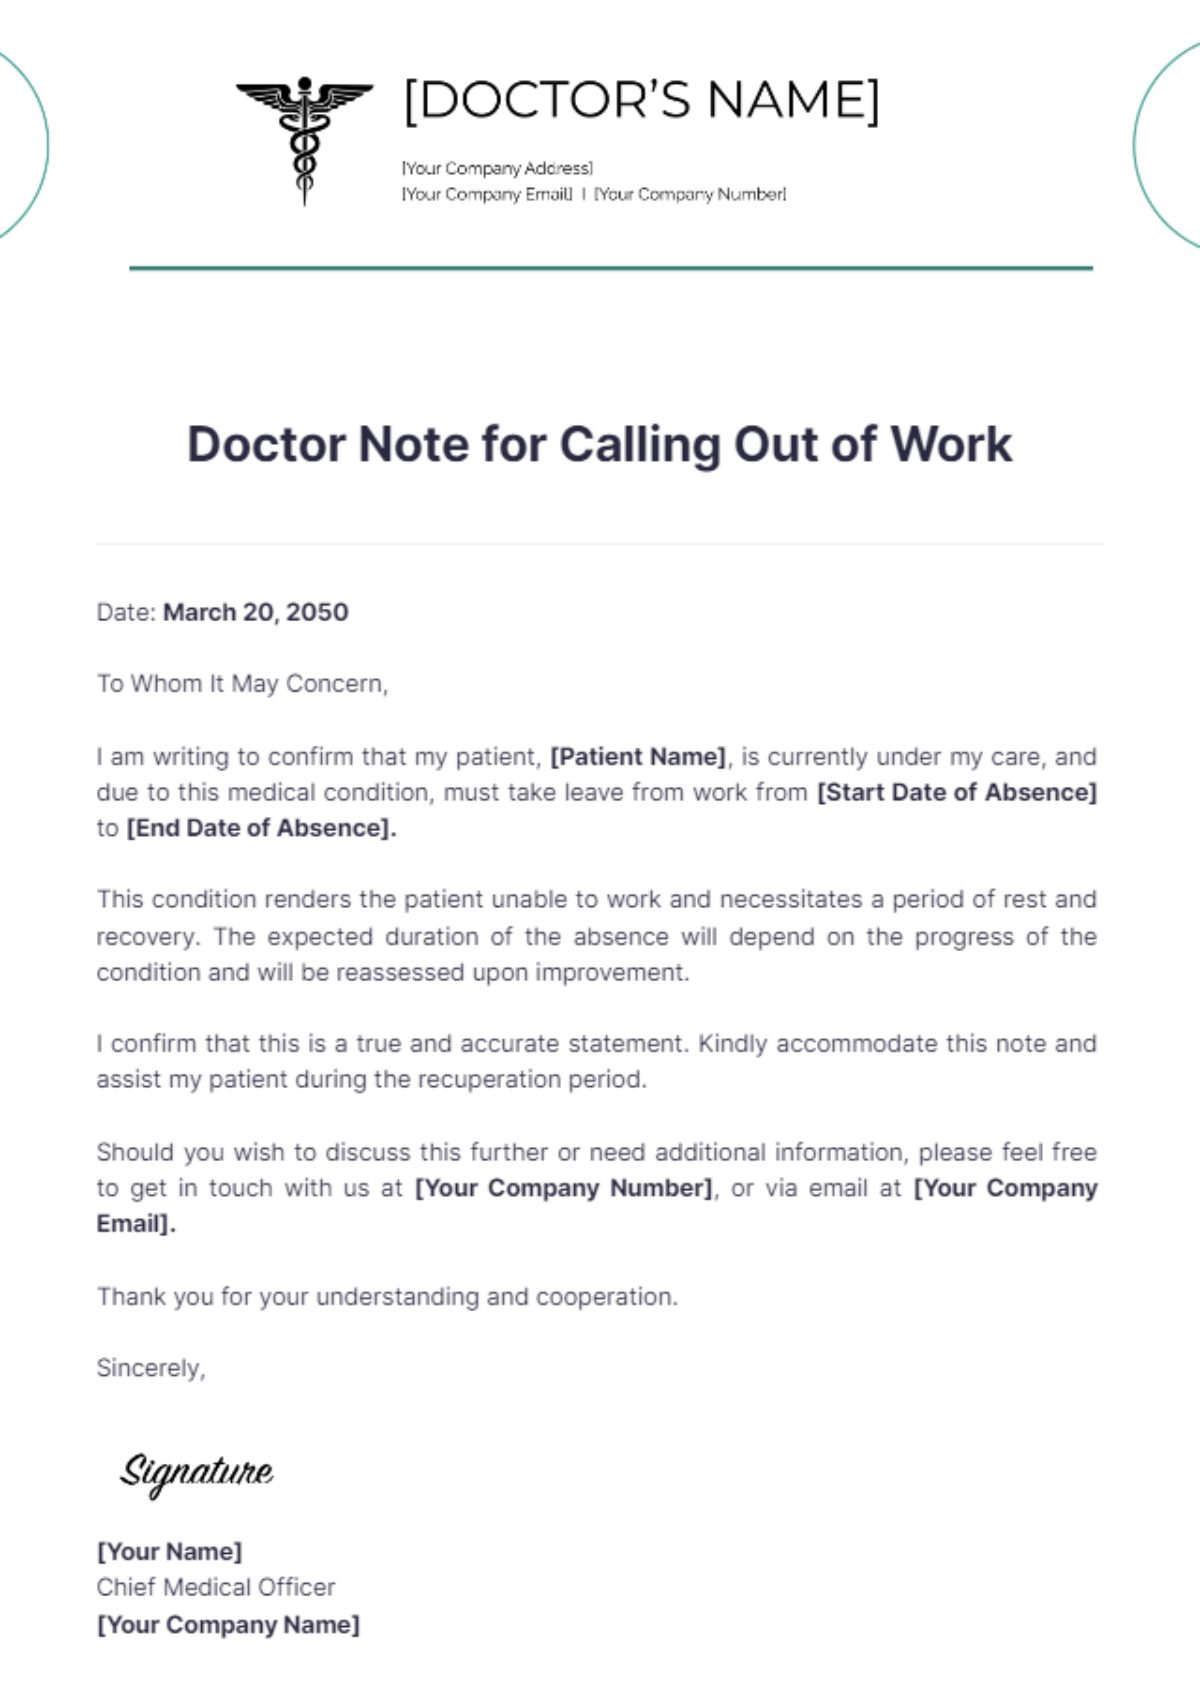 Free Doctor Note For Calling Out Of Work Template